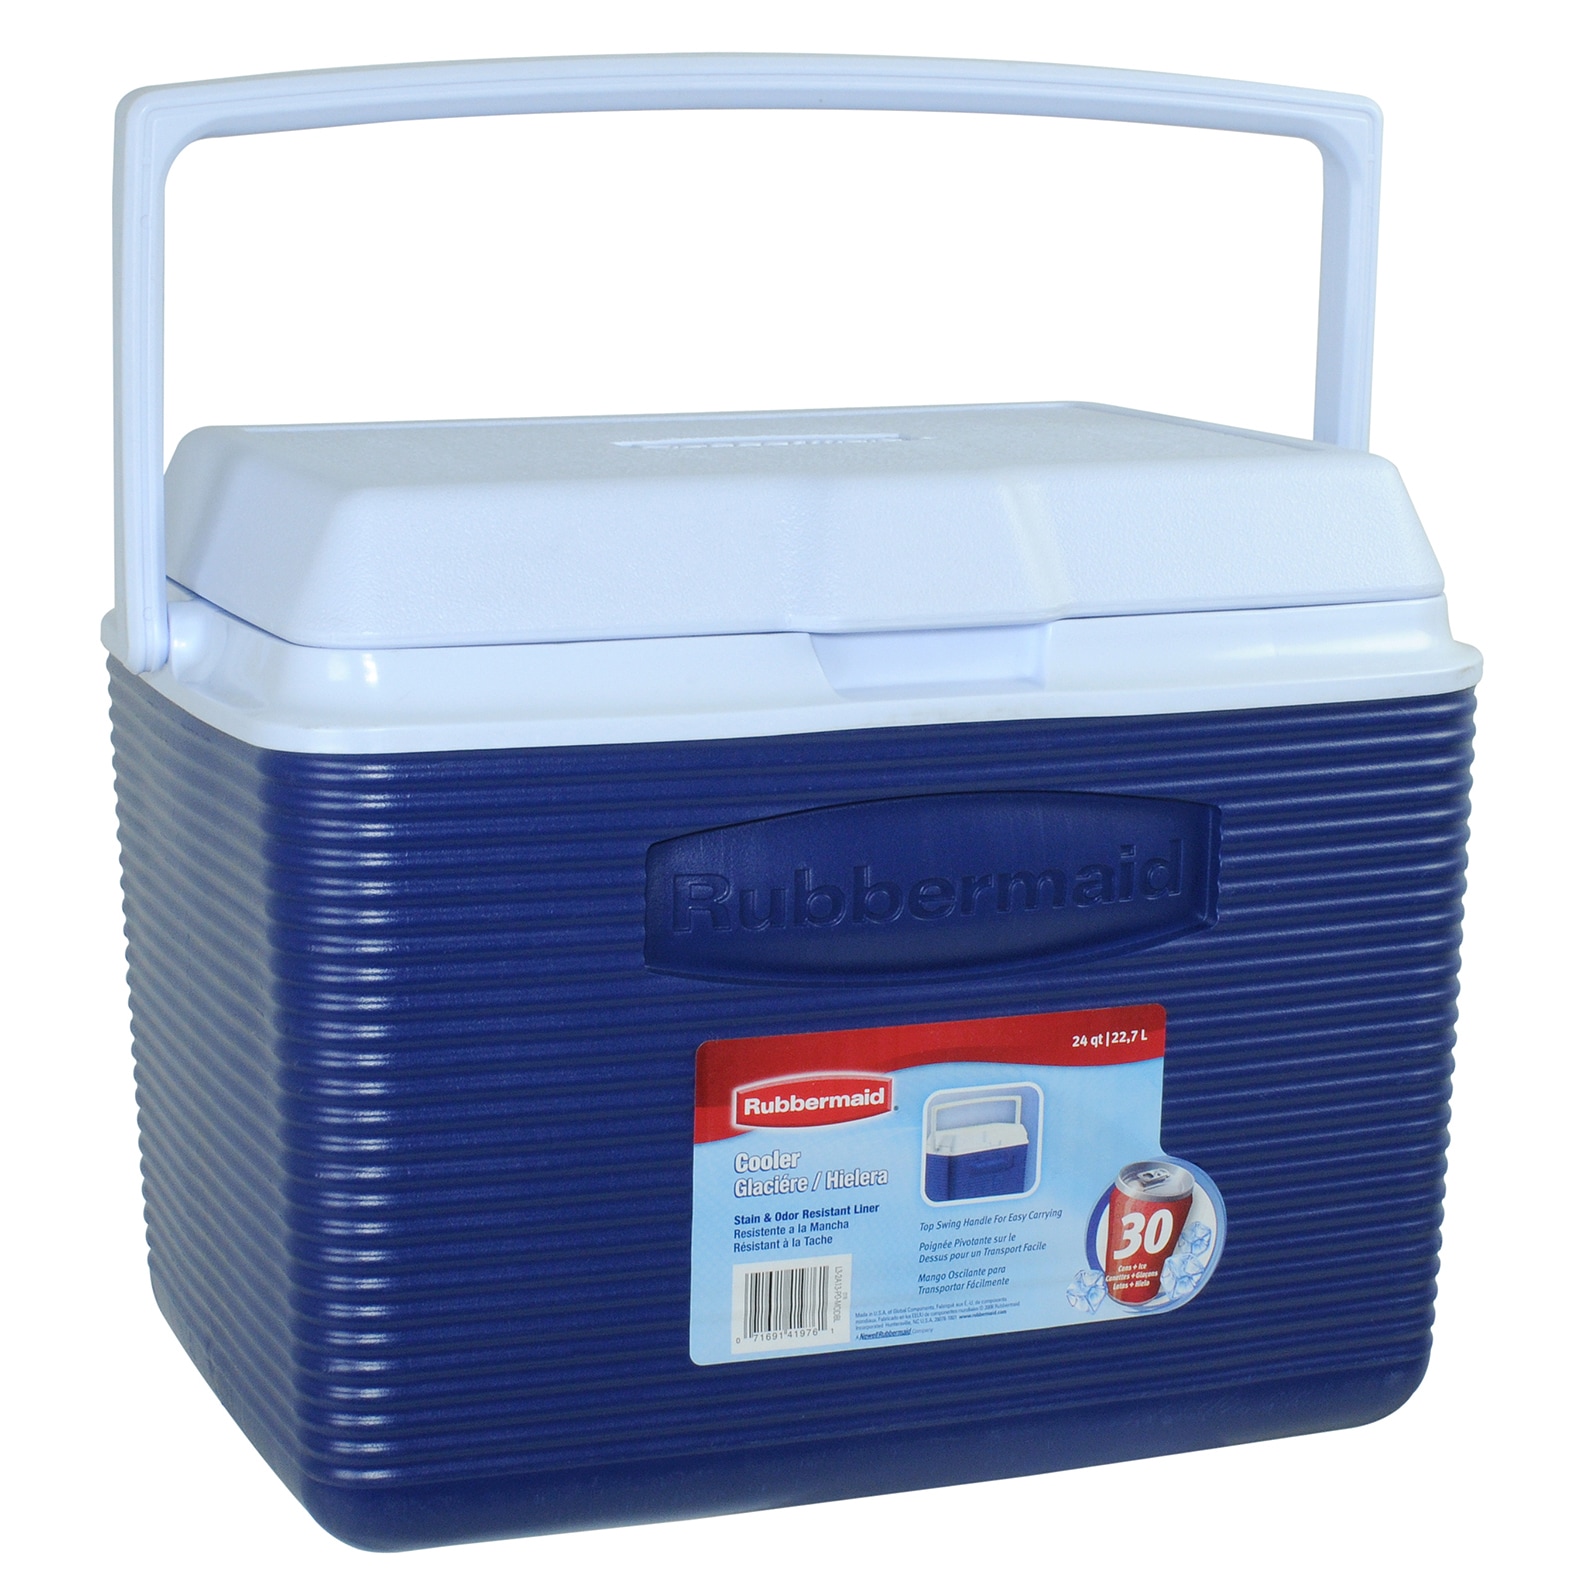 Rubbermaid Blue Wheeled Insulated Chest Cooler at